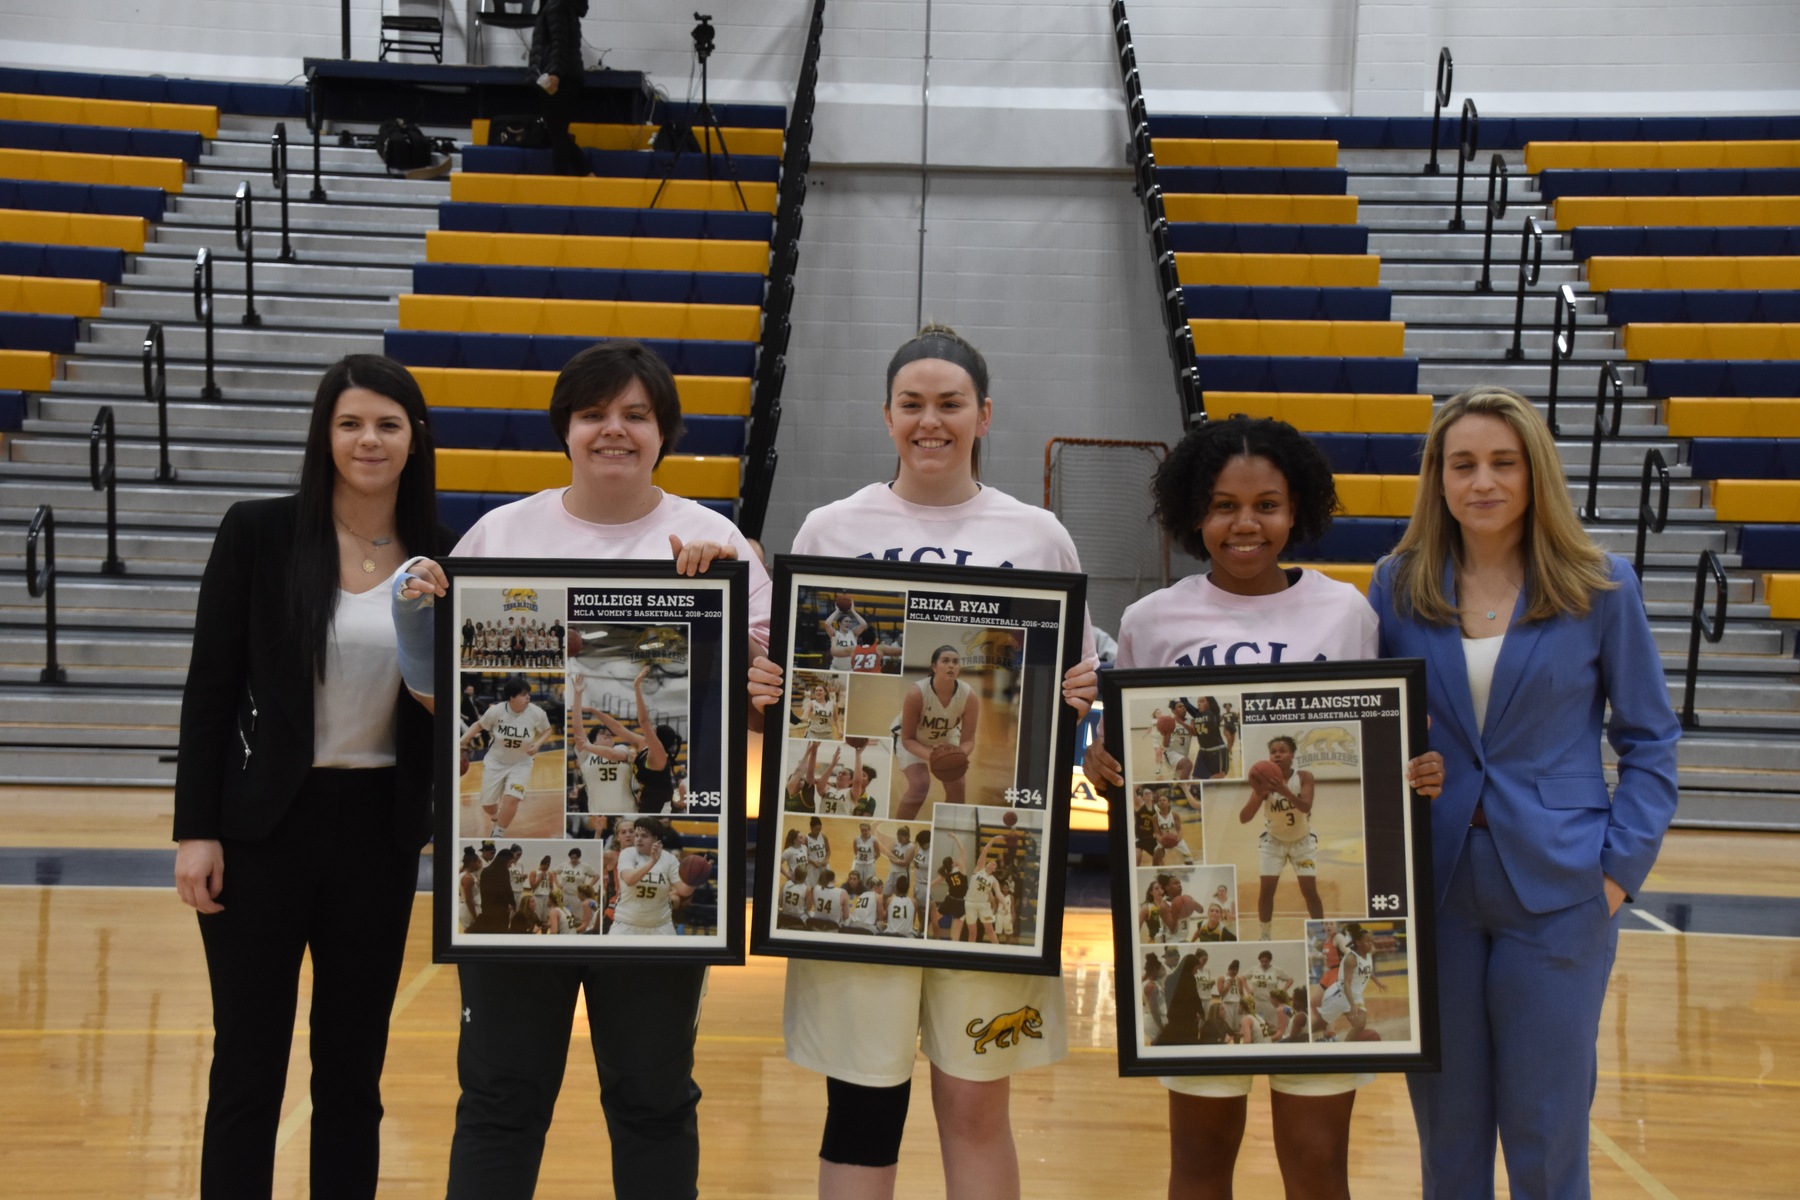 Women's Basketball nipped at home by Worcester 68-64 on Senior Day